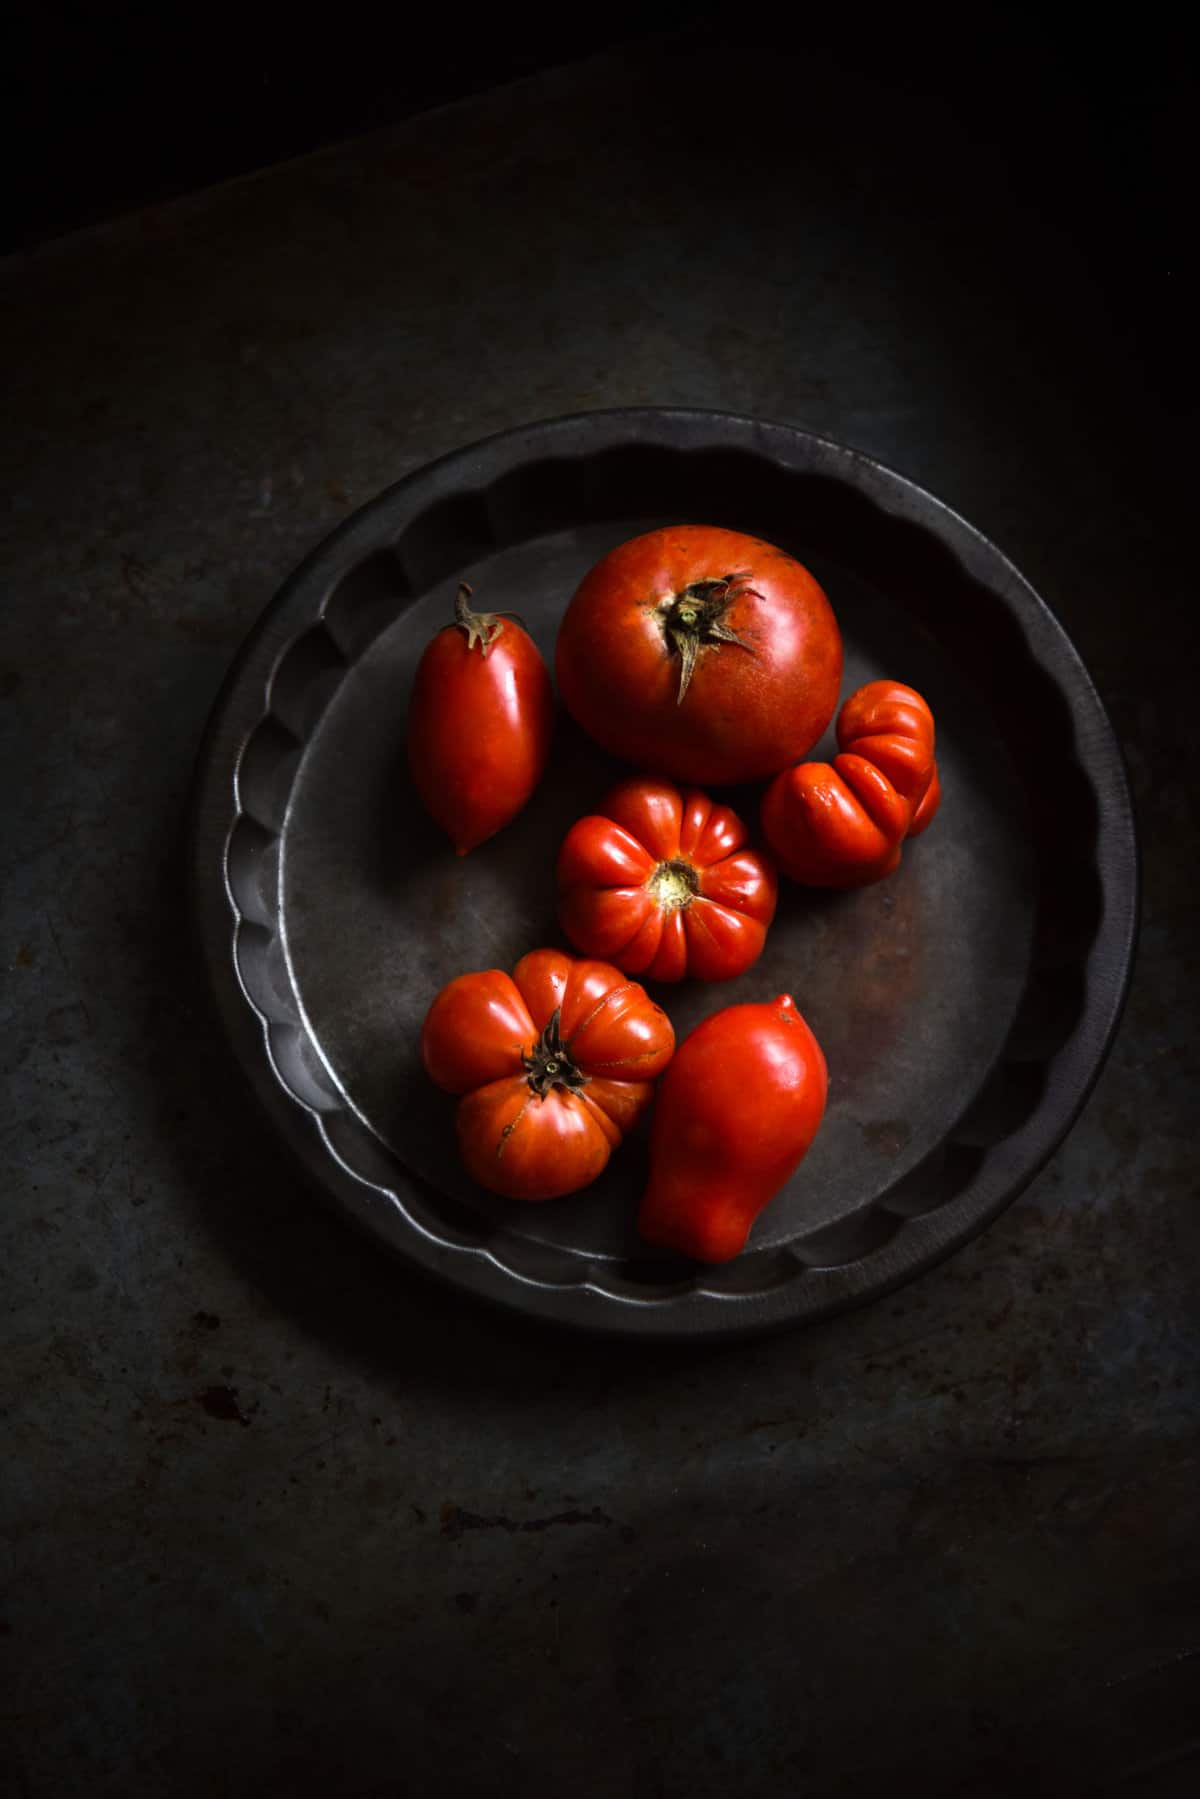 A macro moody image of heirloom tomatoes in a vintage steel baking tin atop a dark backdrop